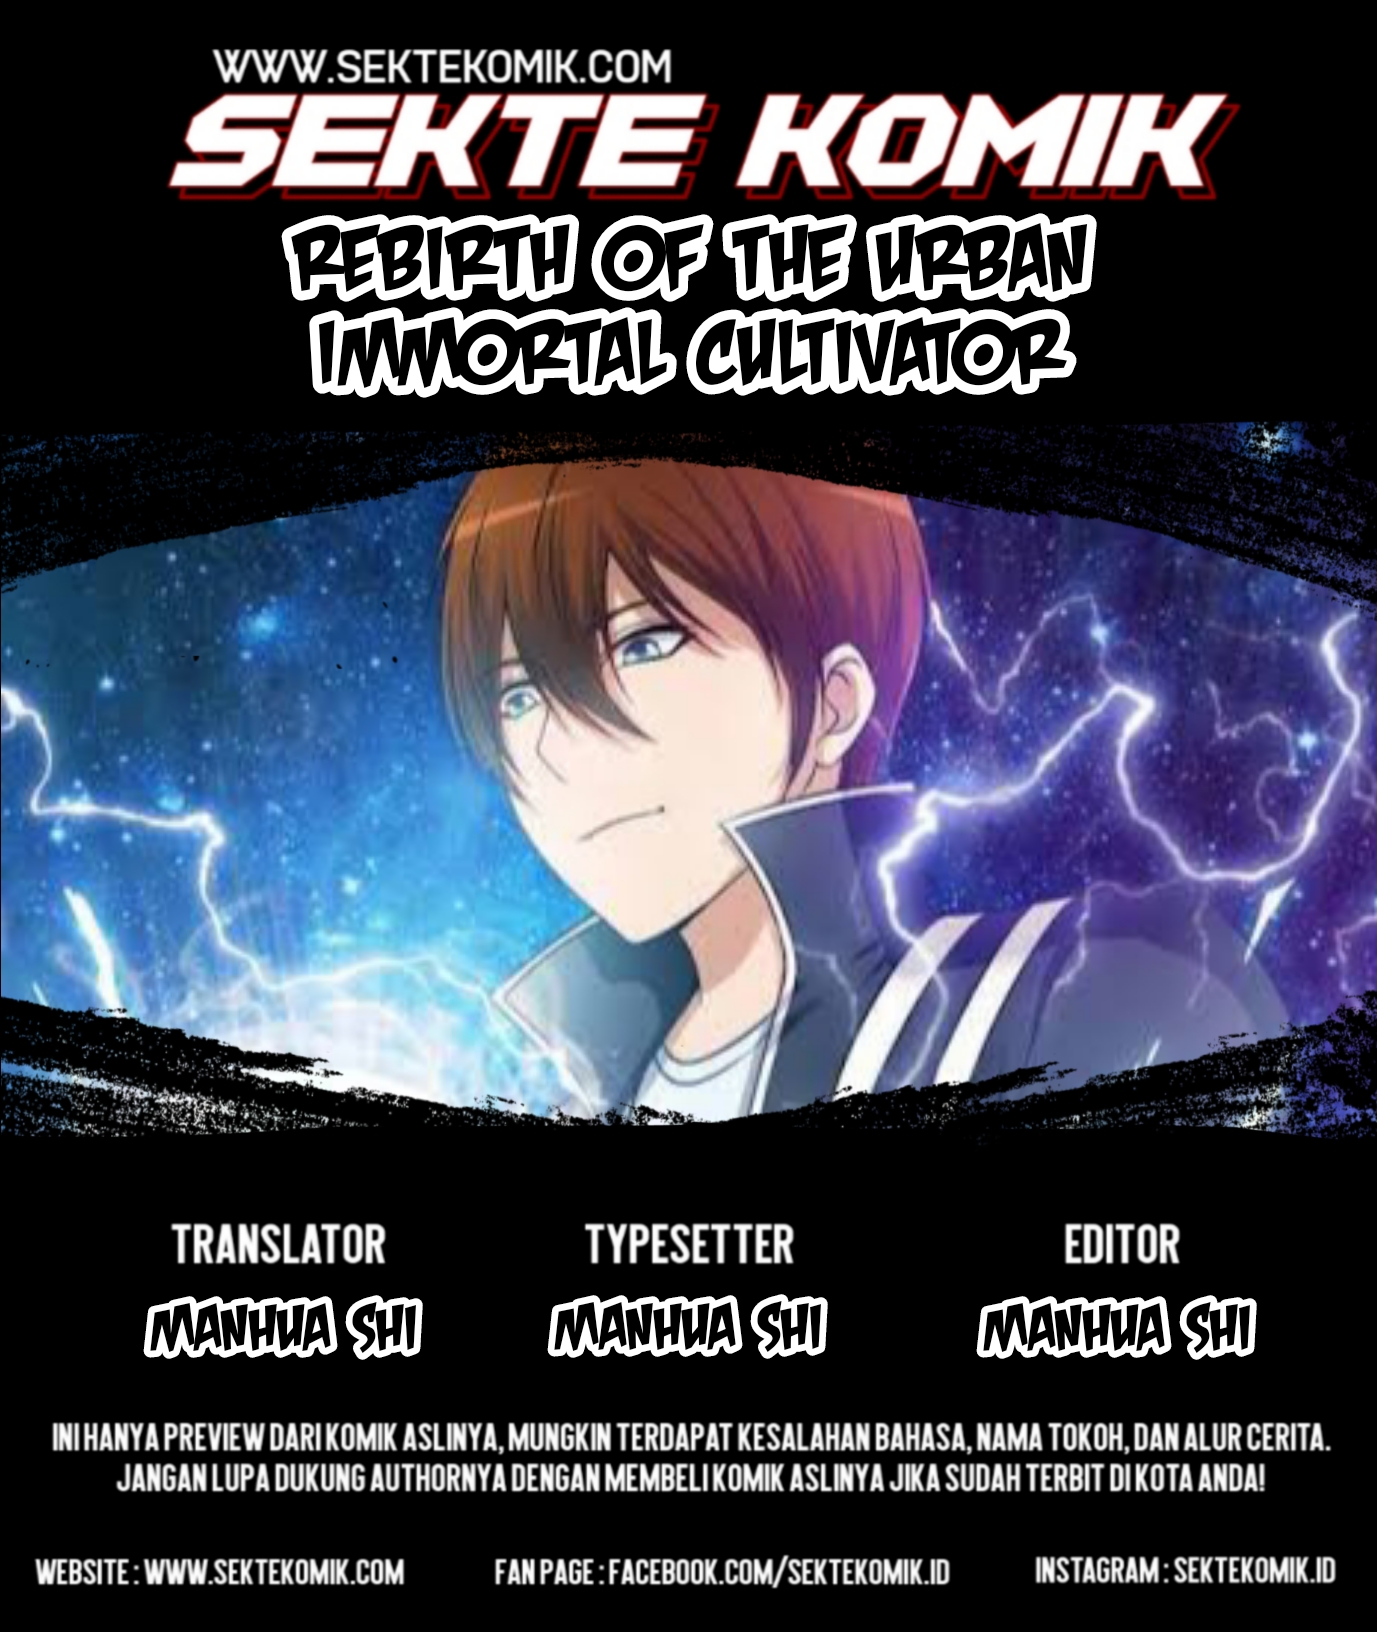 Rebirth Of The Urban Immortal Cultivator Chapter 284